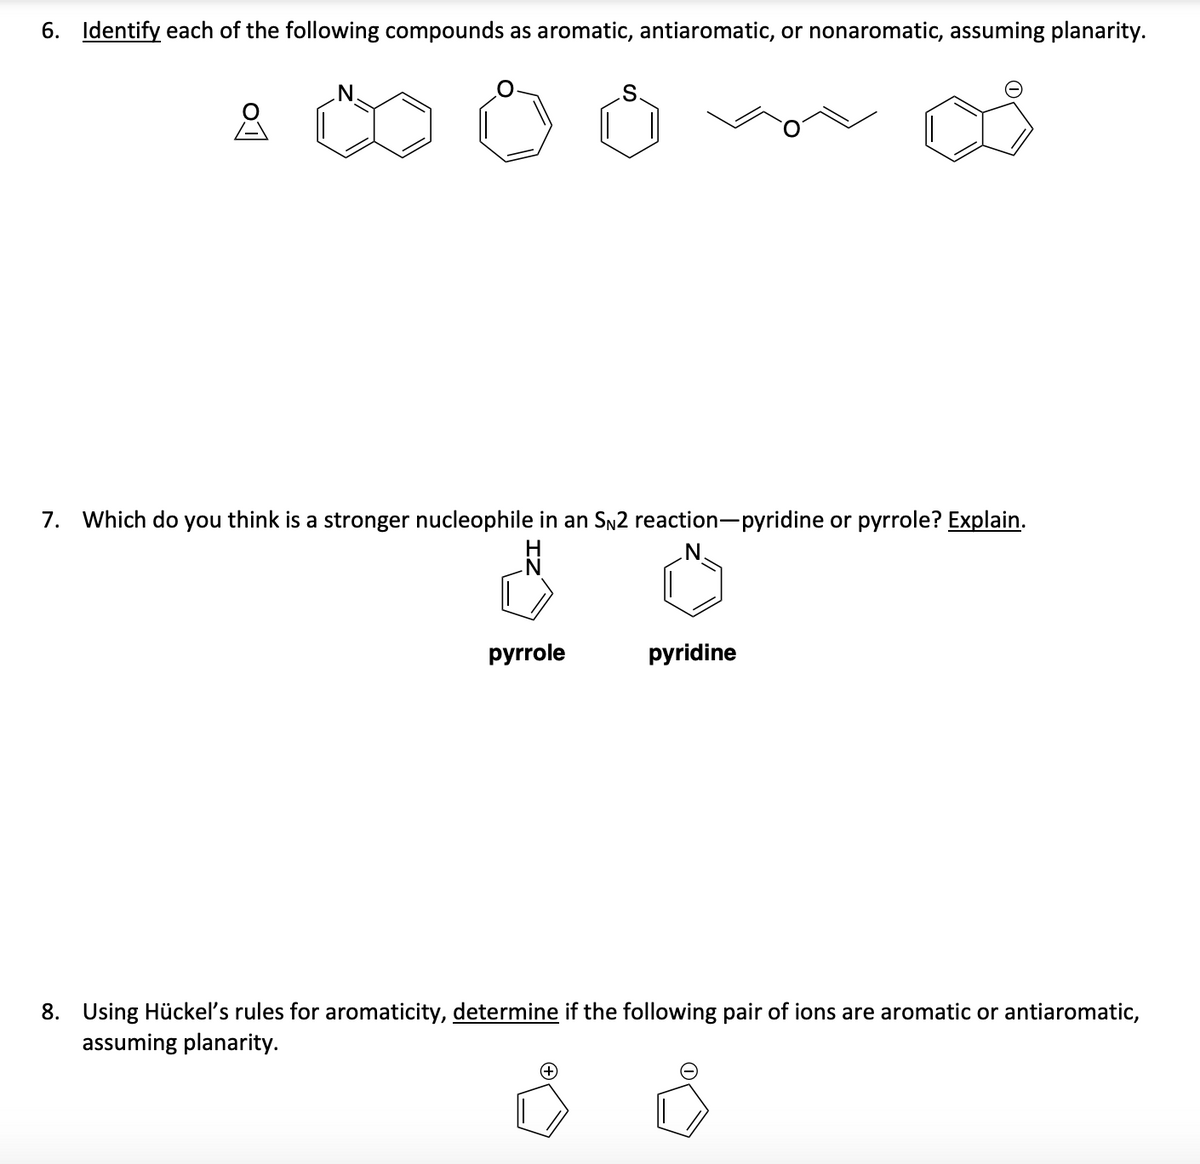 6. Identify each of the following compounds as aromatic, antiaromatic, or nonaromatic, assuming planarity.
S.
7. Which do you think is a stronger nucleophile in an SN2 reaction-pyridine or pyrrole? Explain.
pyrrole
pyridine
8. Using Hückel's rules for aromaticity, determine if the following pair of ions are aromatic or antiaromatic,
assuming planarity.